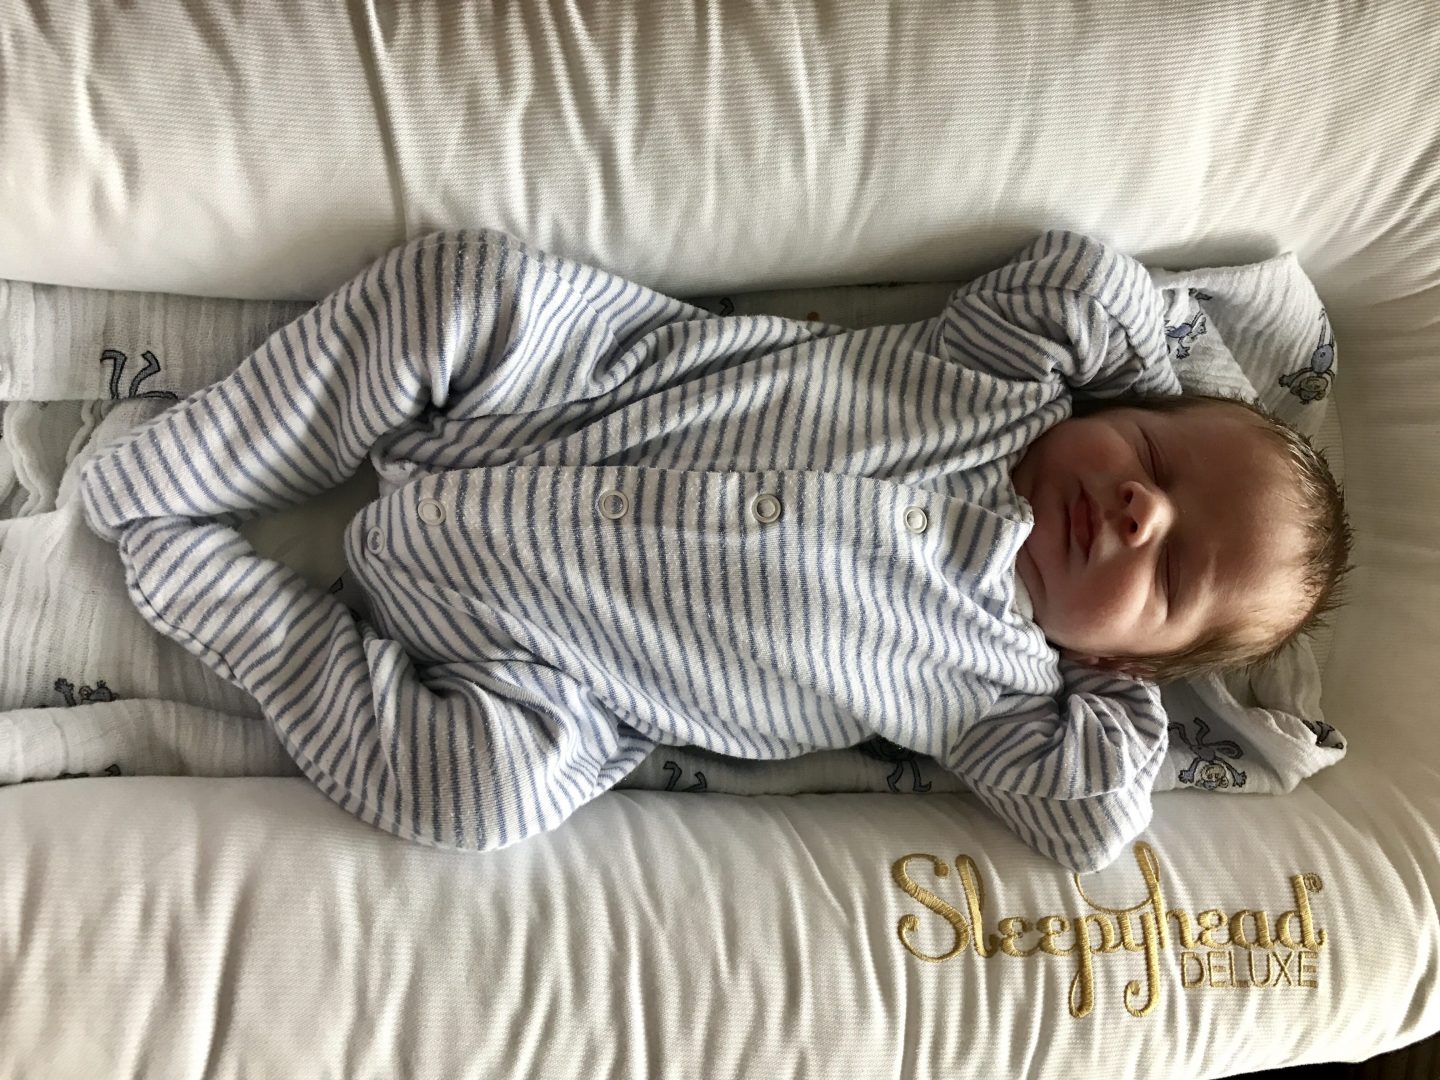 Sleepyhead Deluxe Pod Review – Does it Help Baby to Sleep Better?